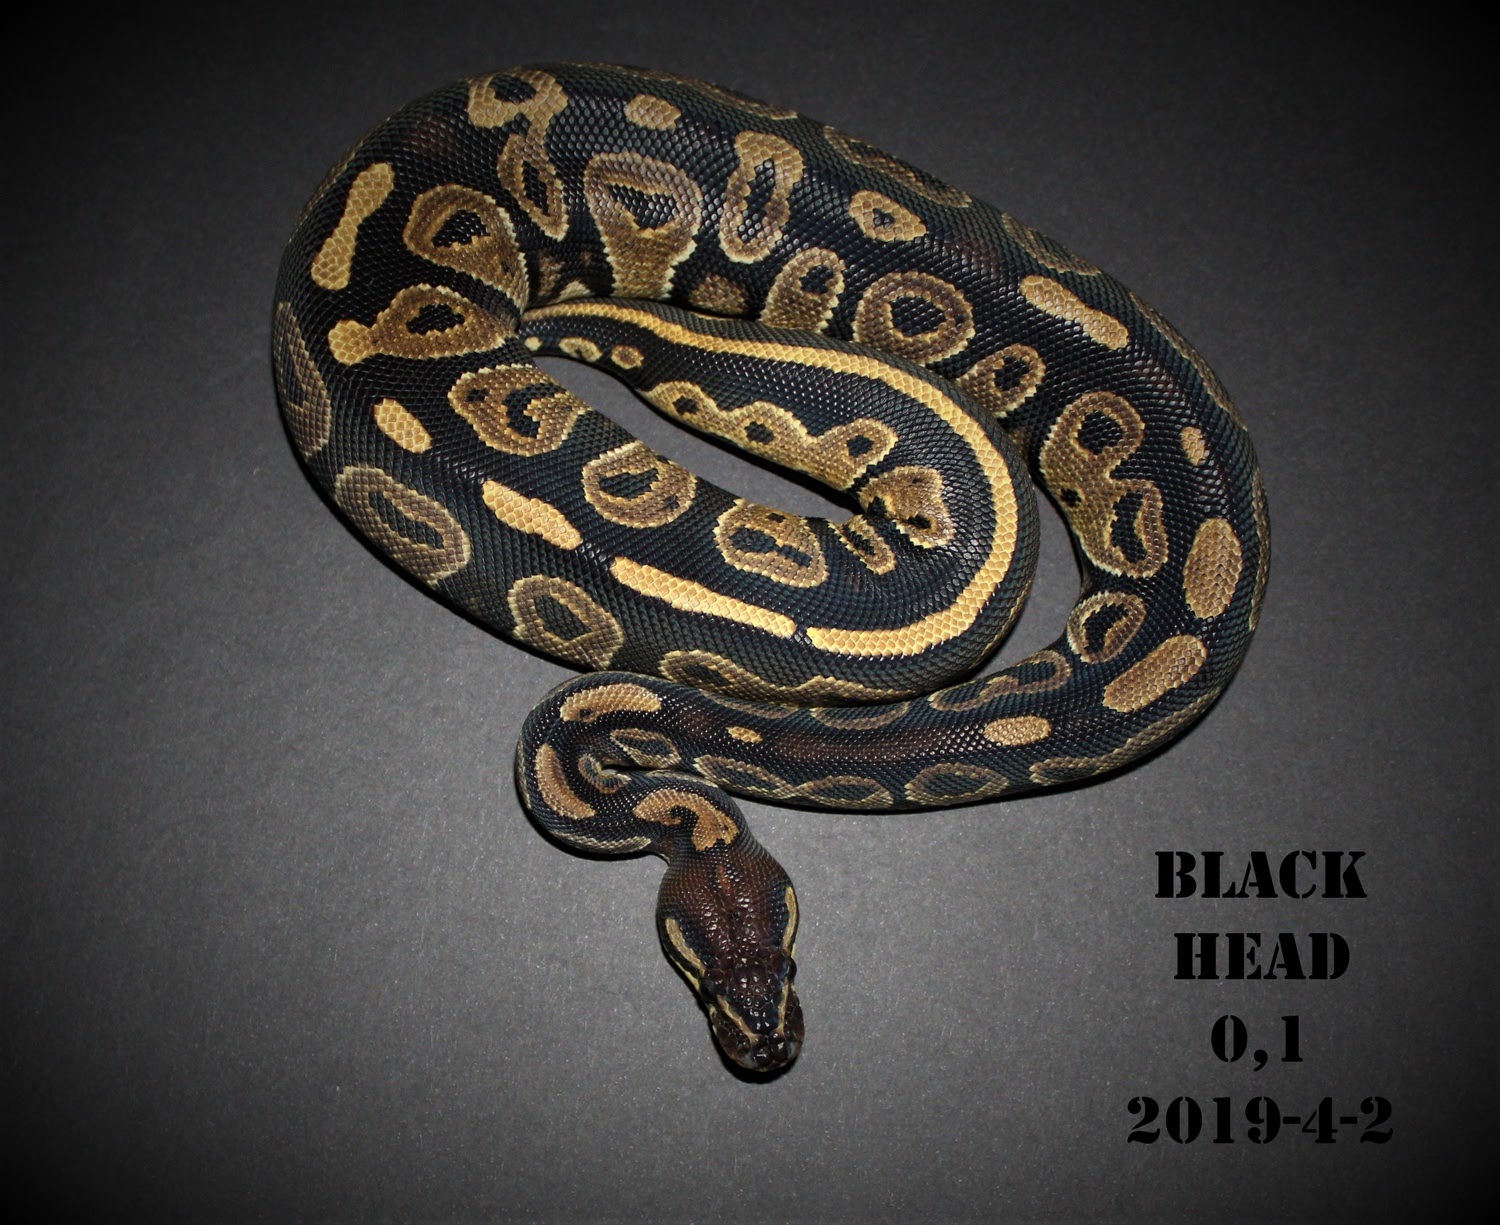 Blackhead By Tonny Clausen at T.C Snakes